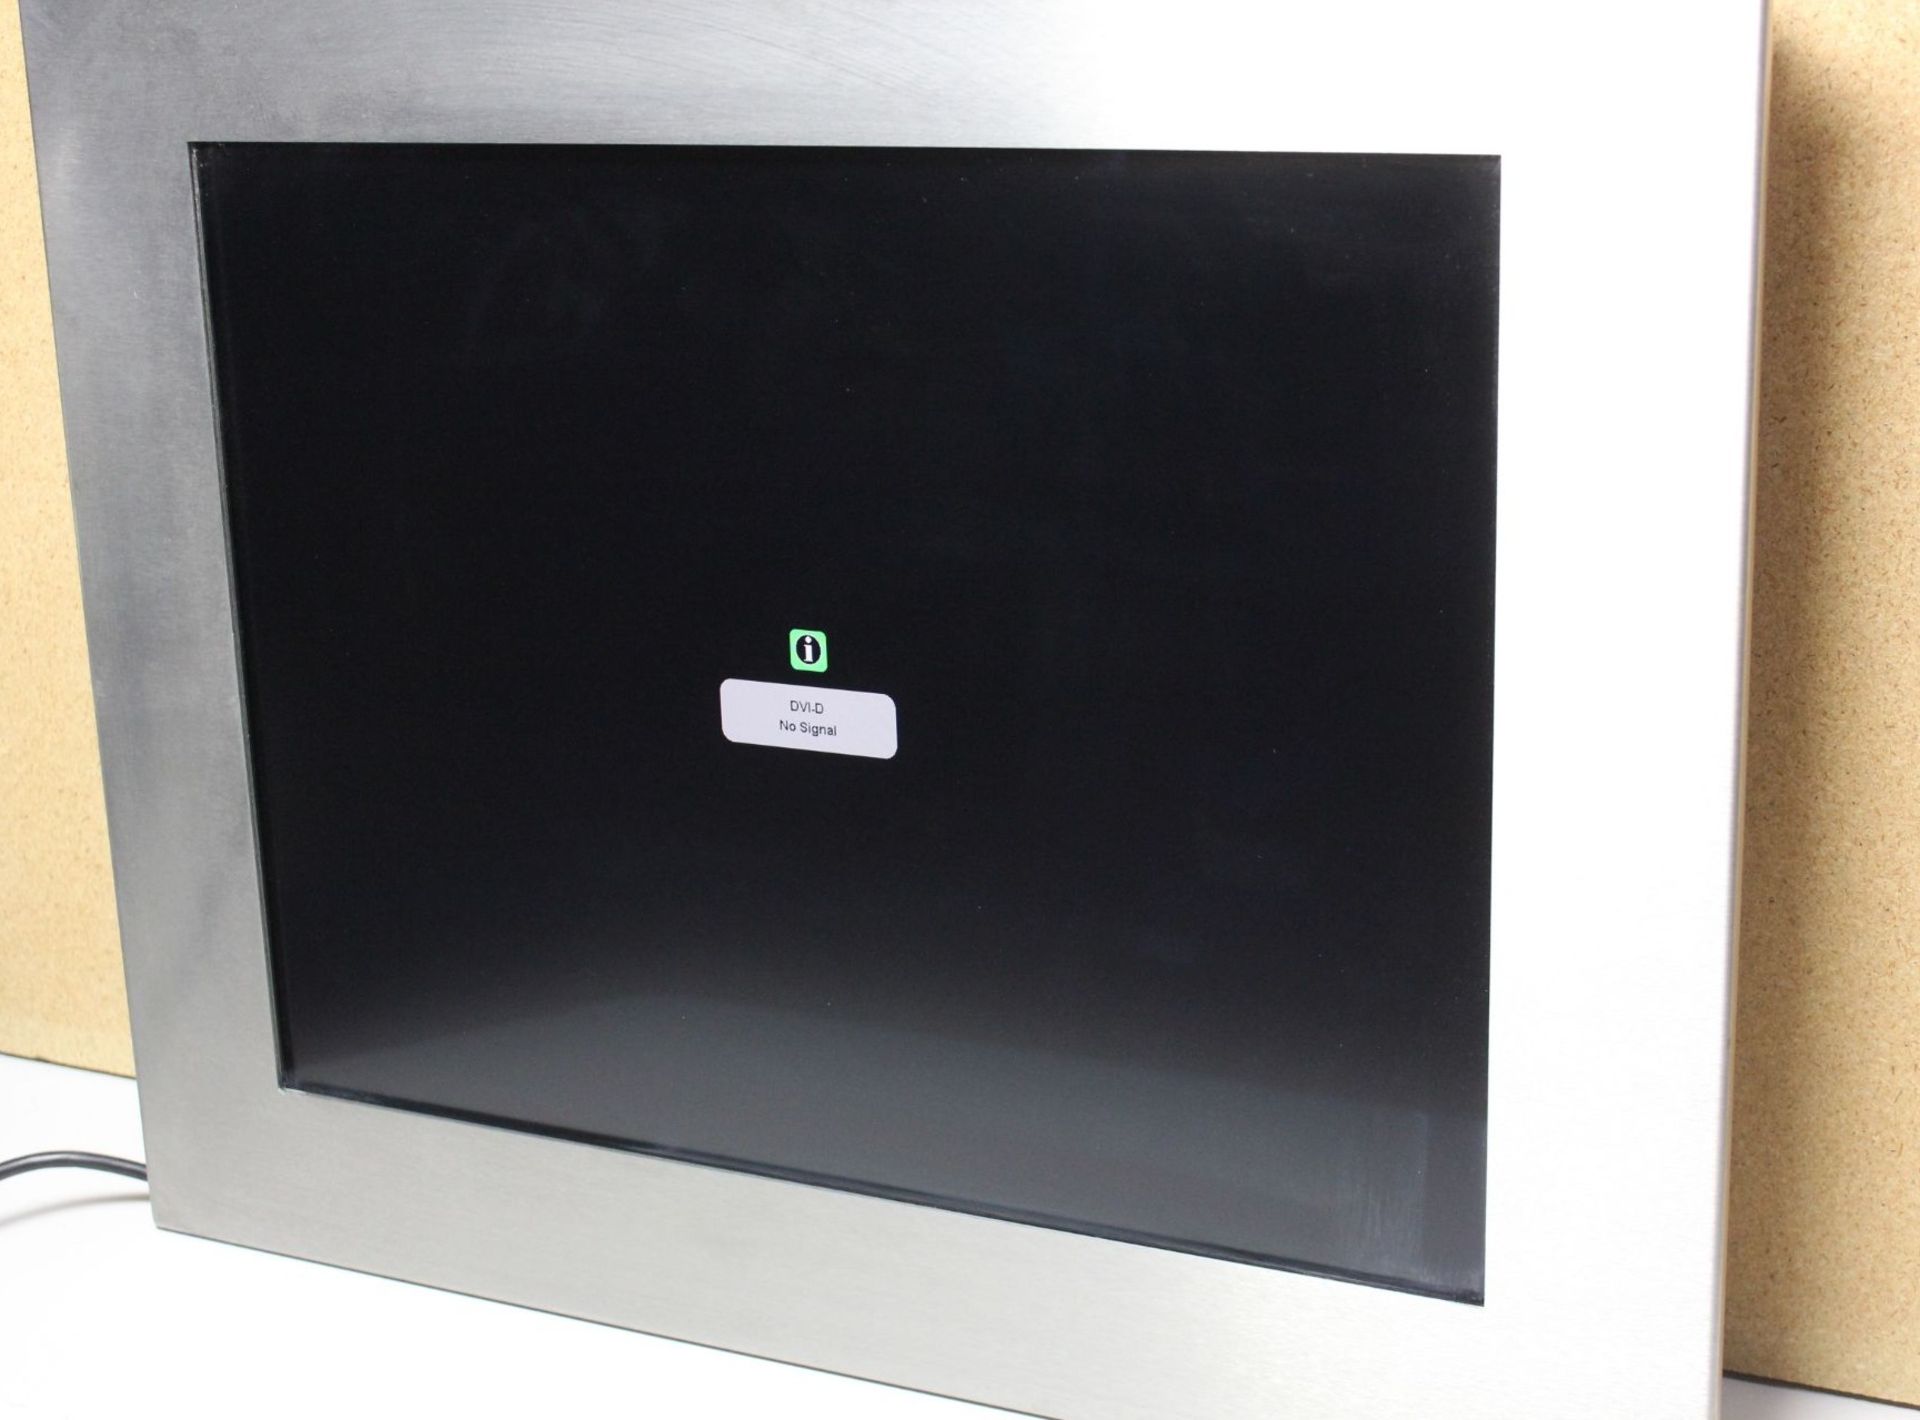 HOPE INDUSTRIAL 20" INDUSTRIAL MONITOR AND TOUCH SCREEN HMI - Image 4 of 9